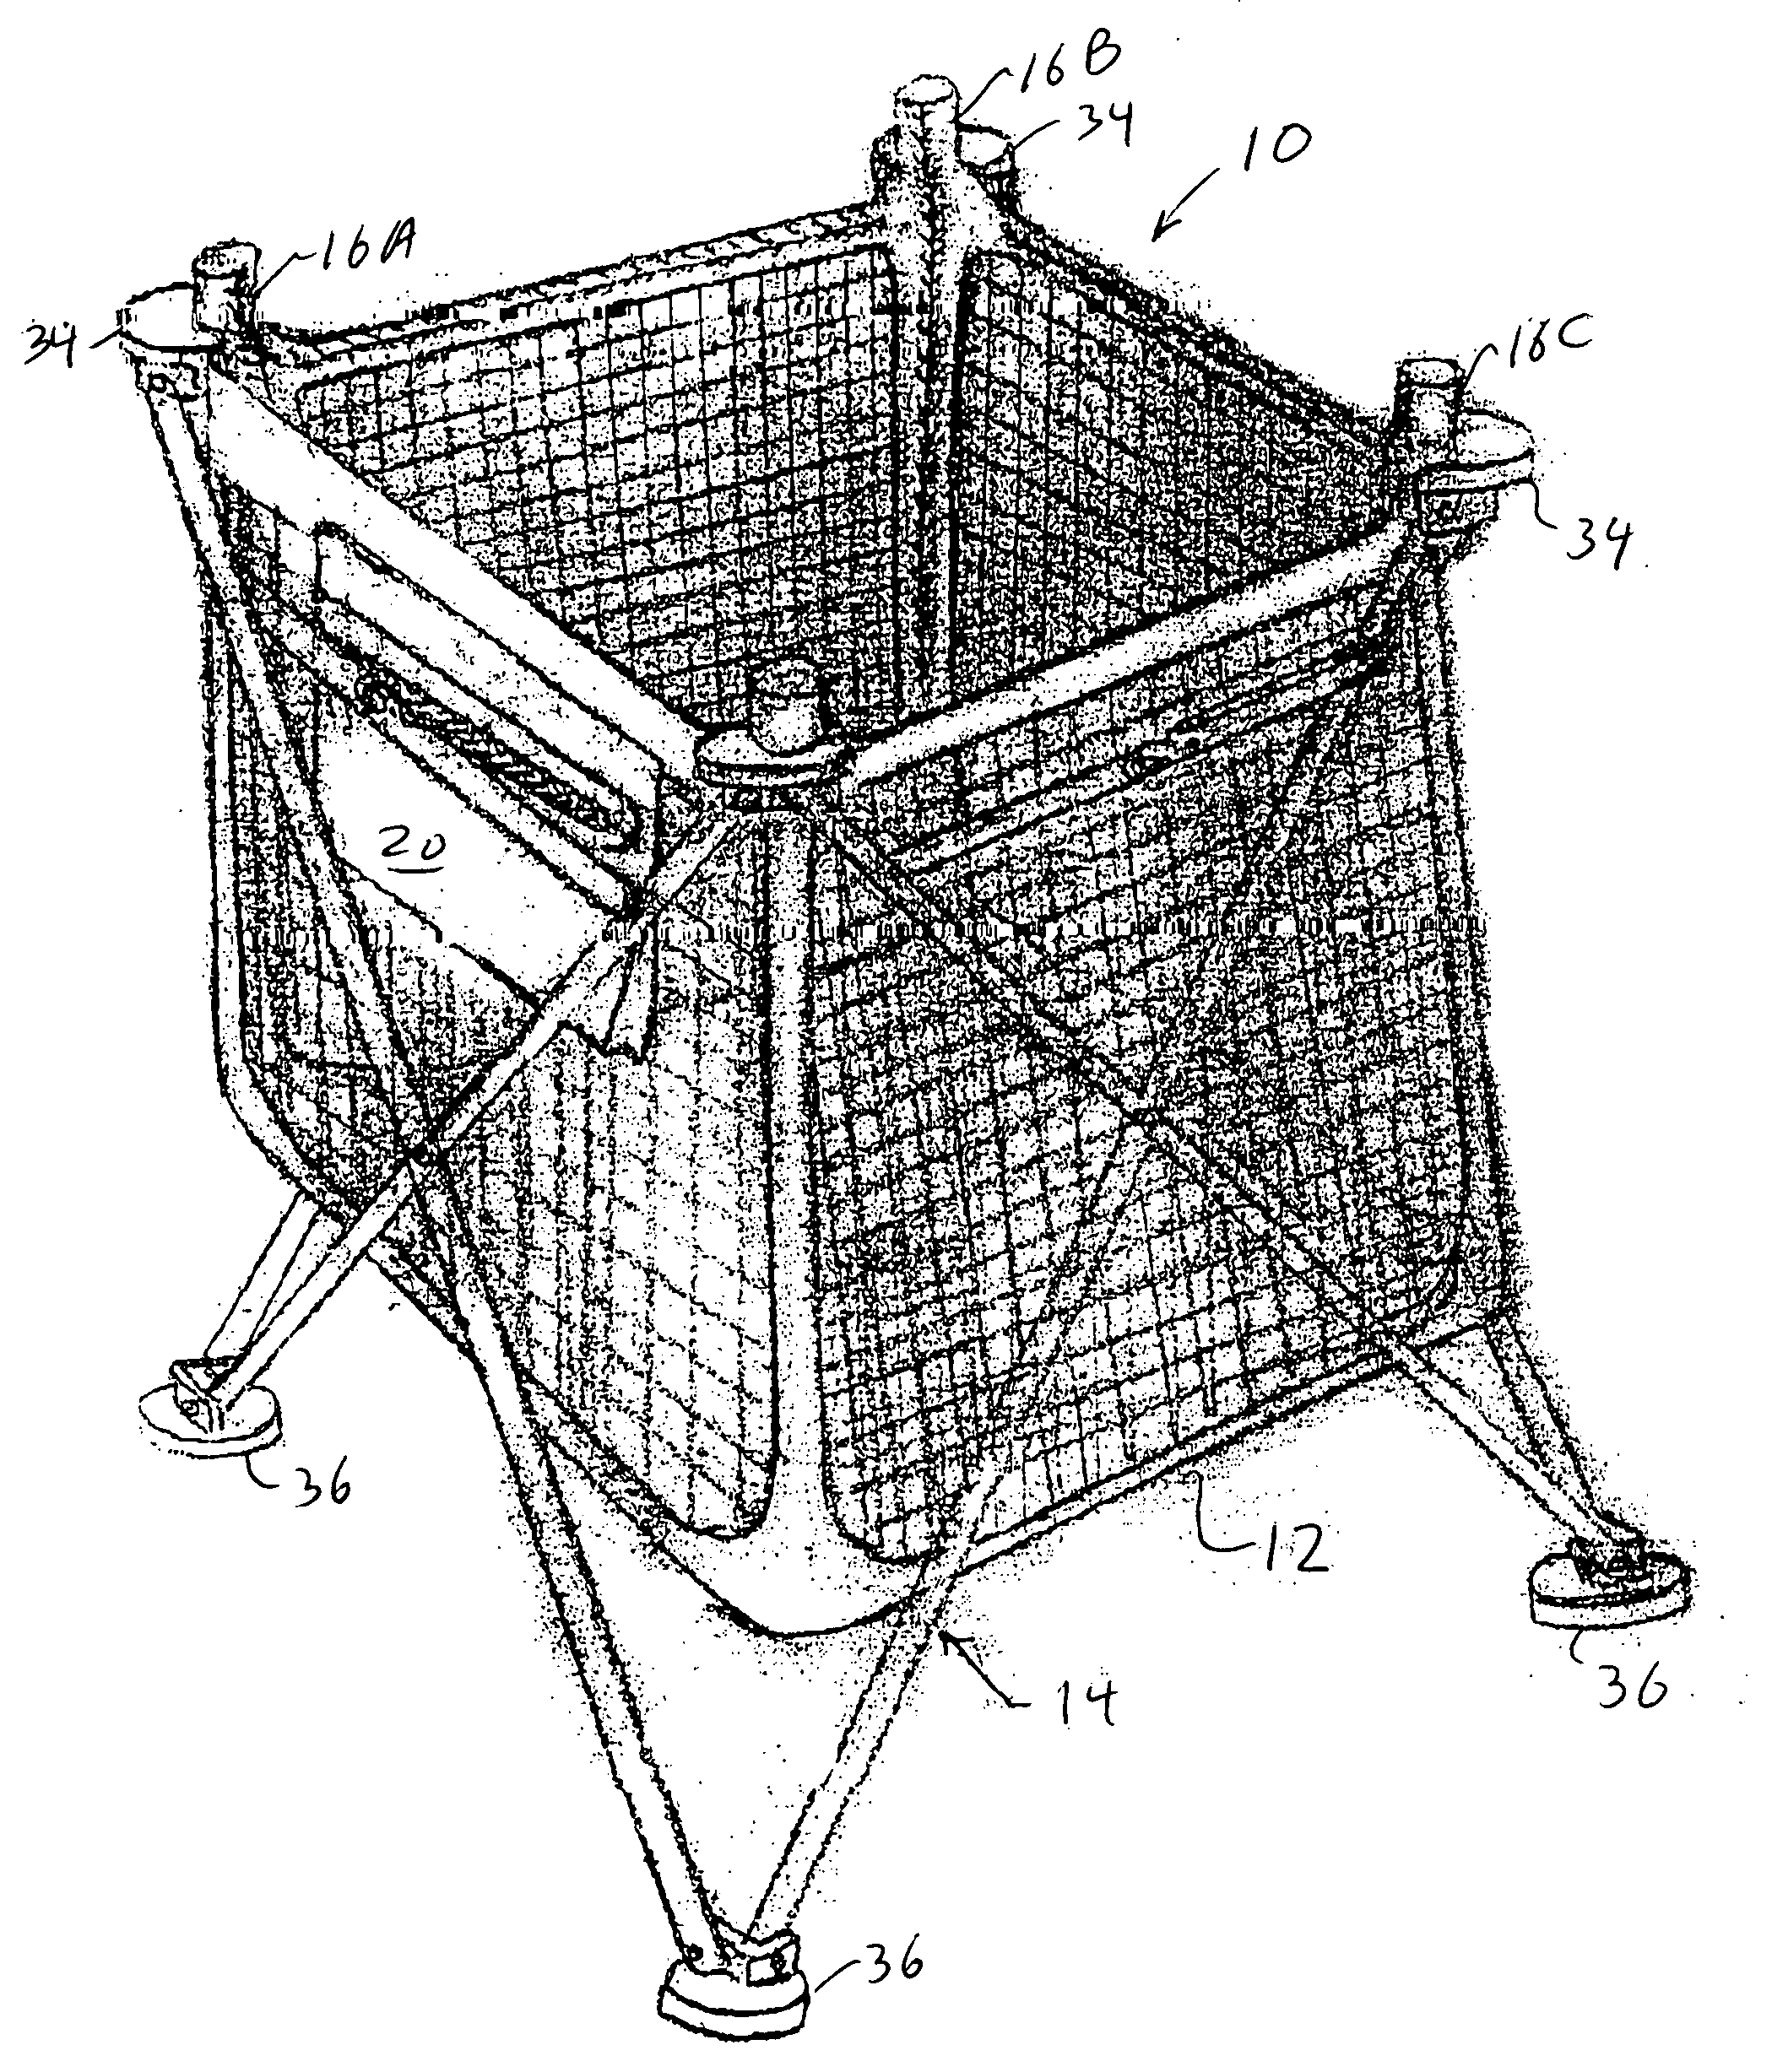 Portable and collapsible trash containment system